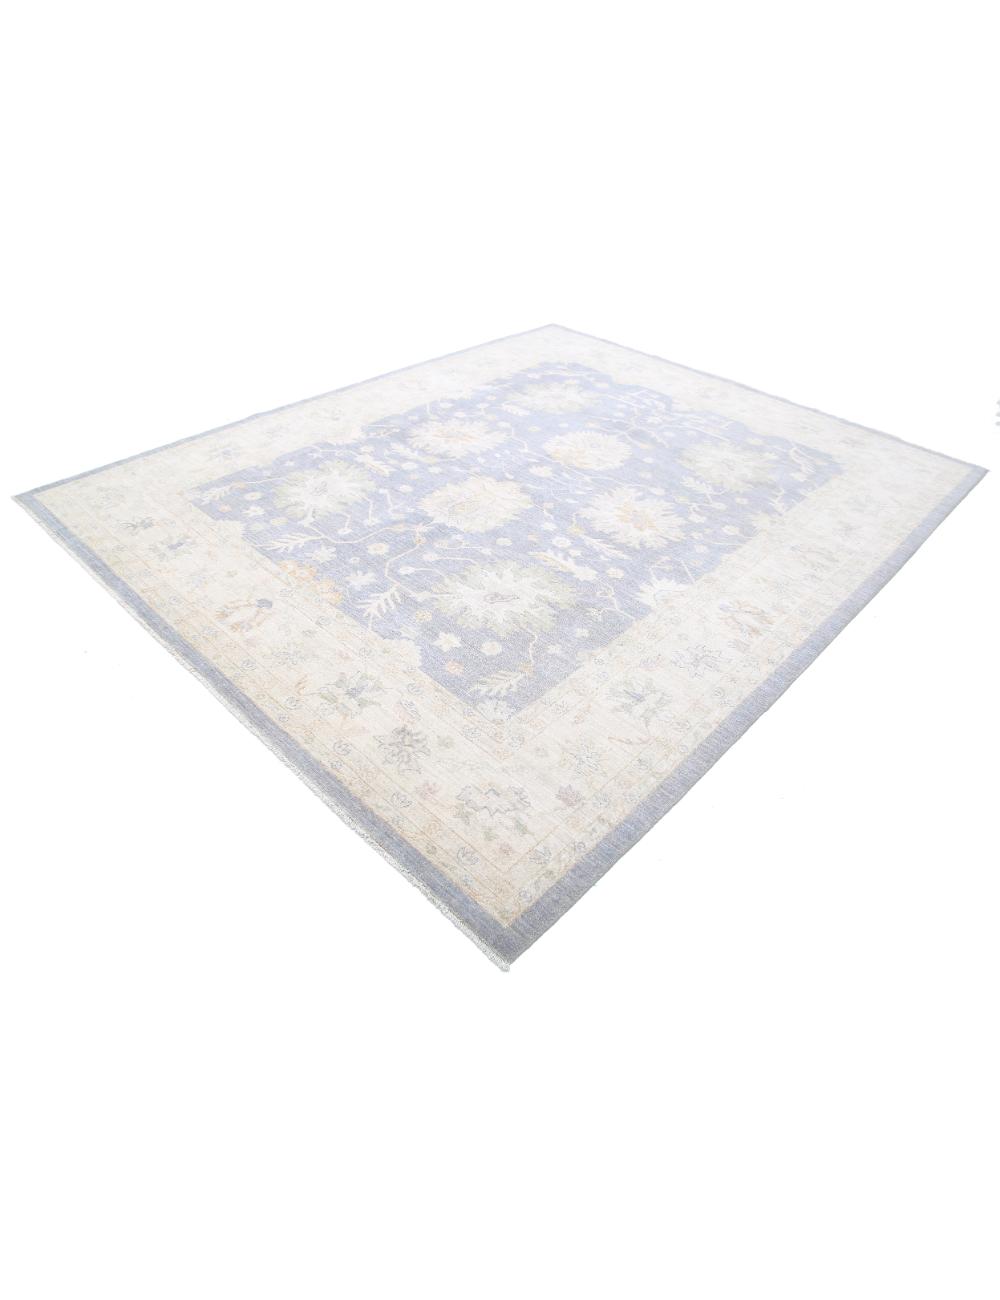 Serenity 8' 3" X 10' 0" Hand-Knotted Wool Rug 8' 3" X 10' 0" (251 X 305) / Grey / Ivory